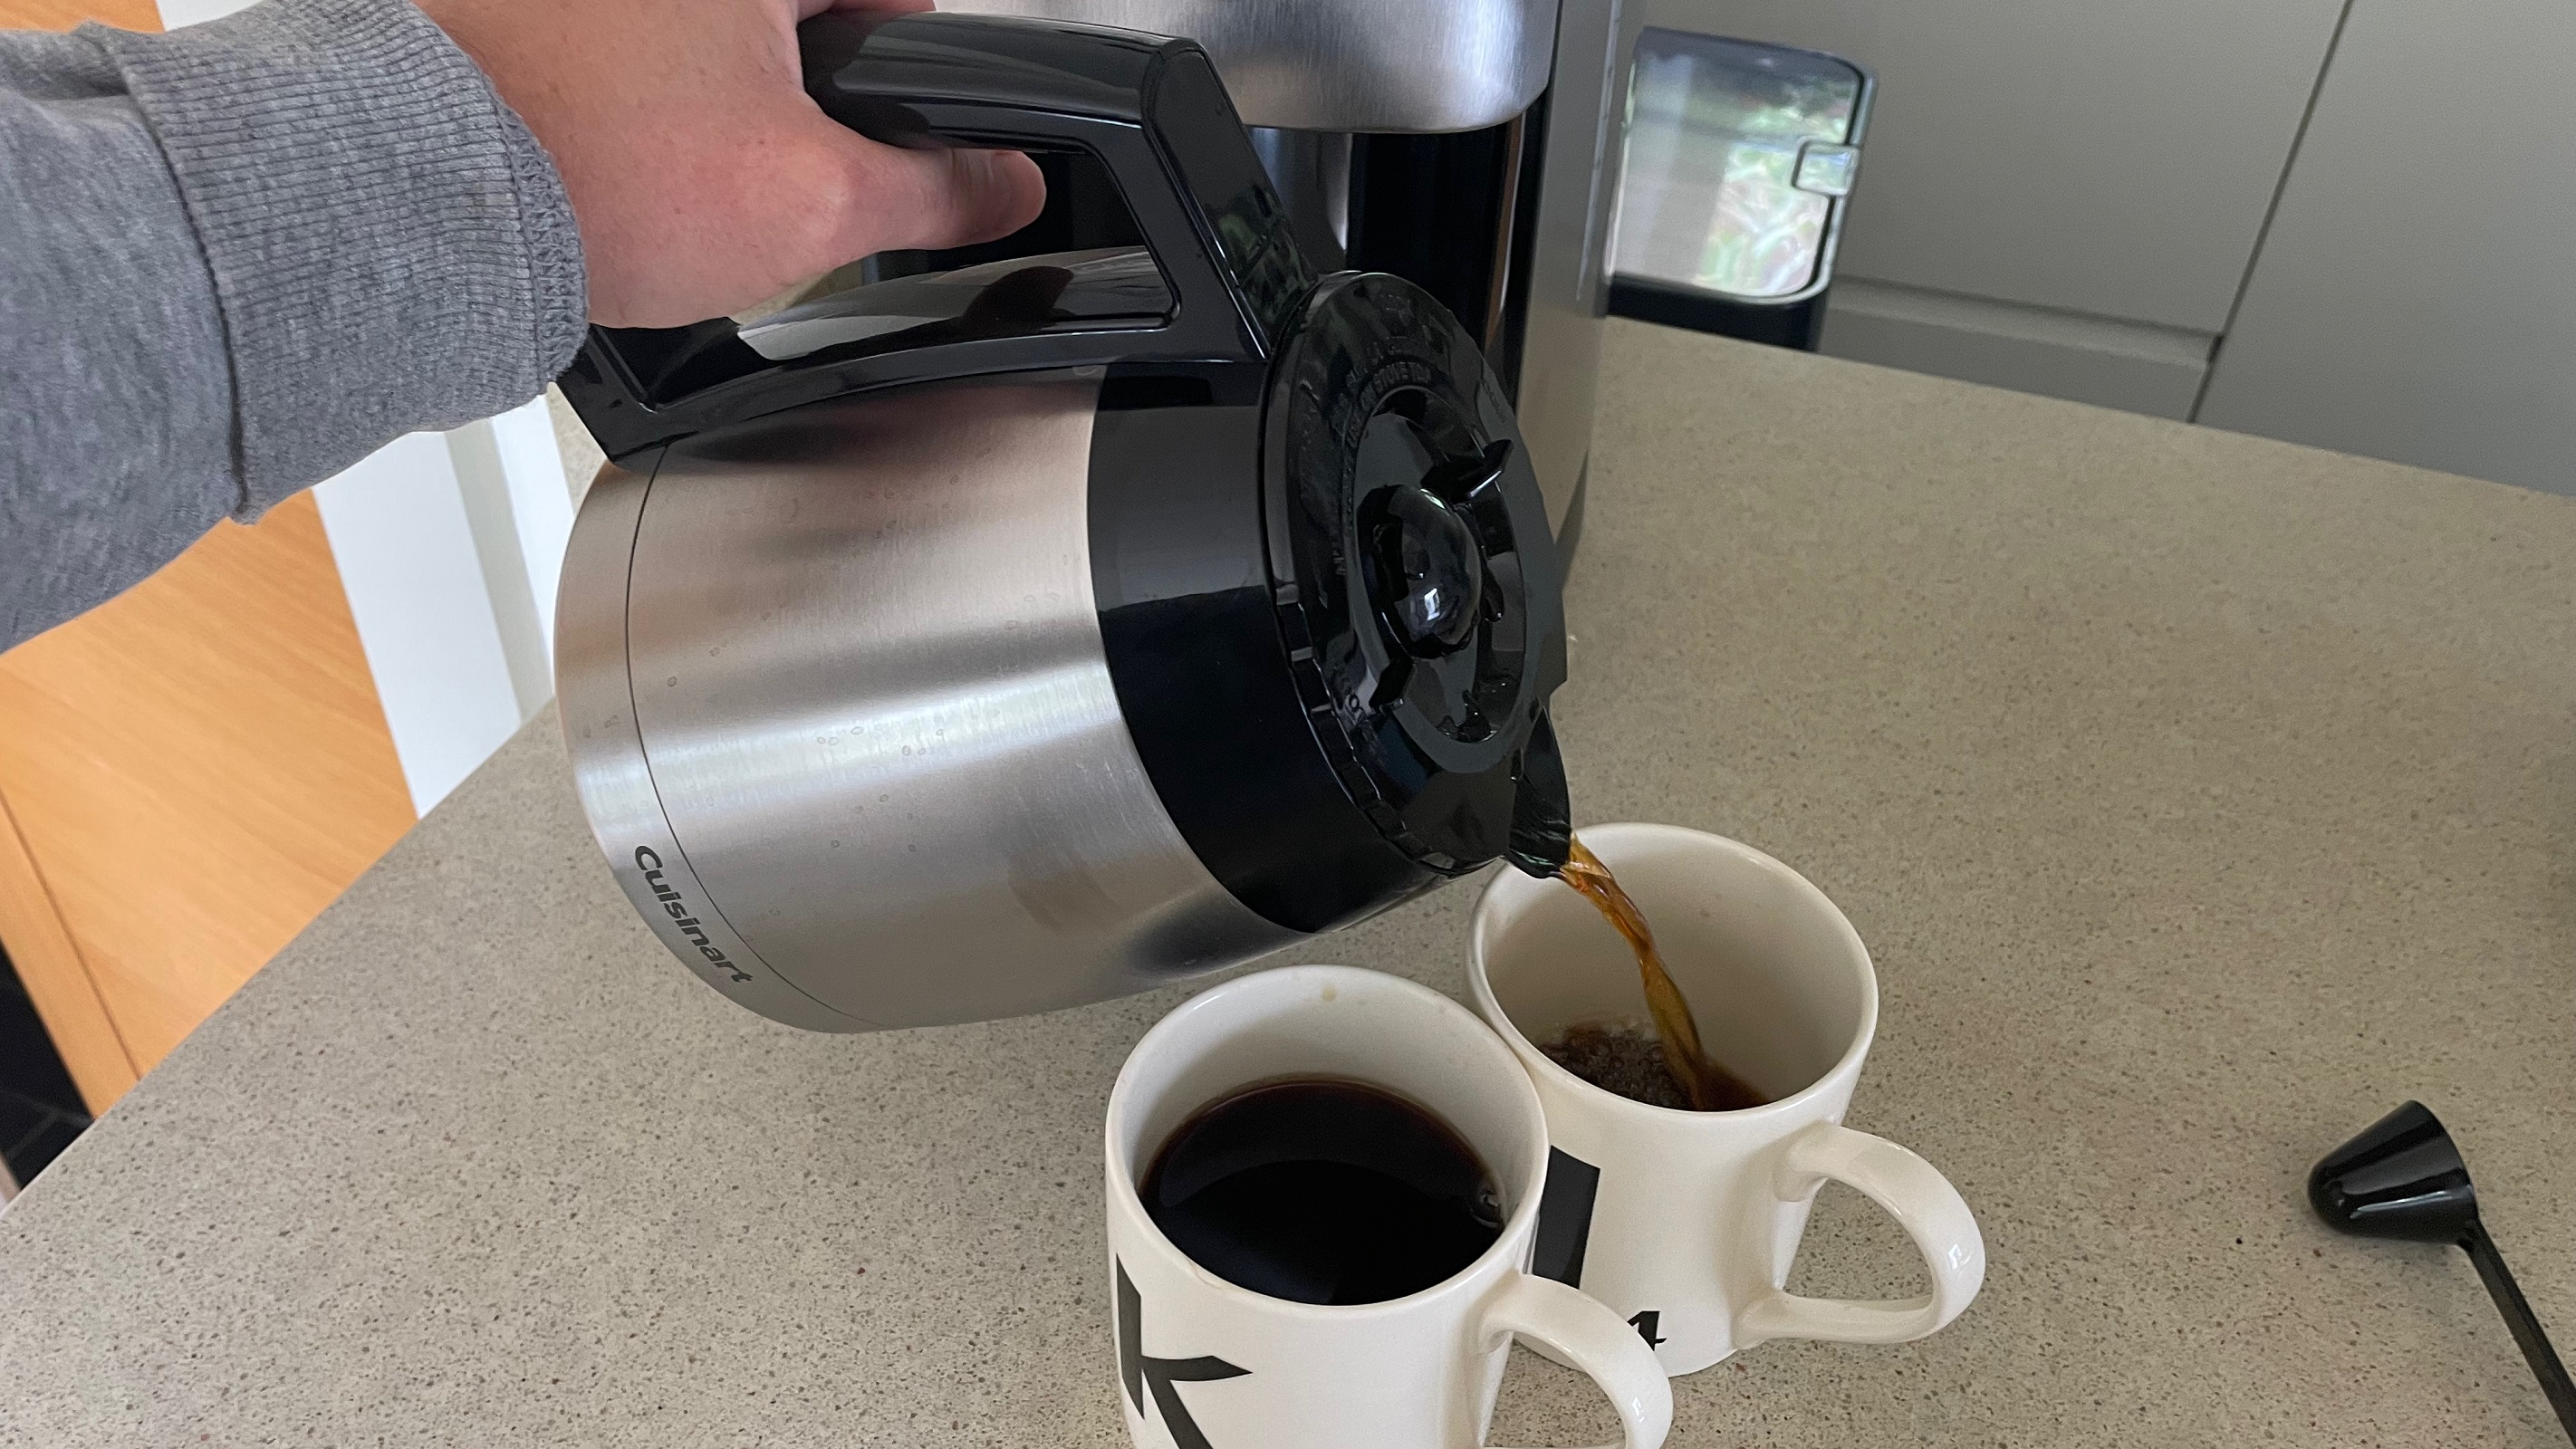 Cuisinart Grind & Brew comes with pouring coffee from The Carefe